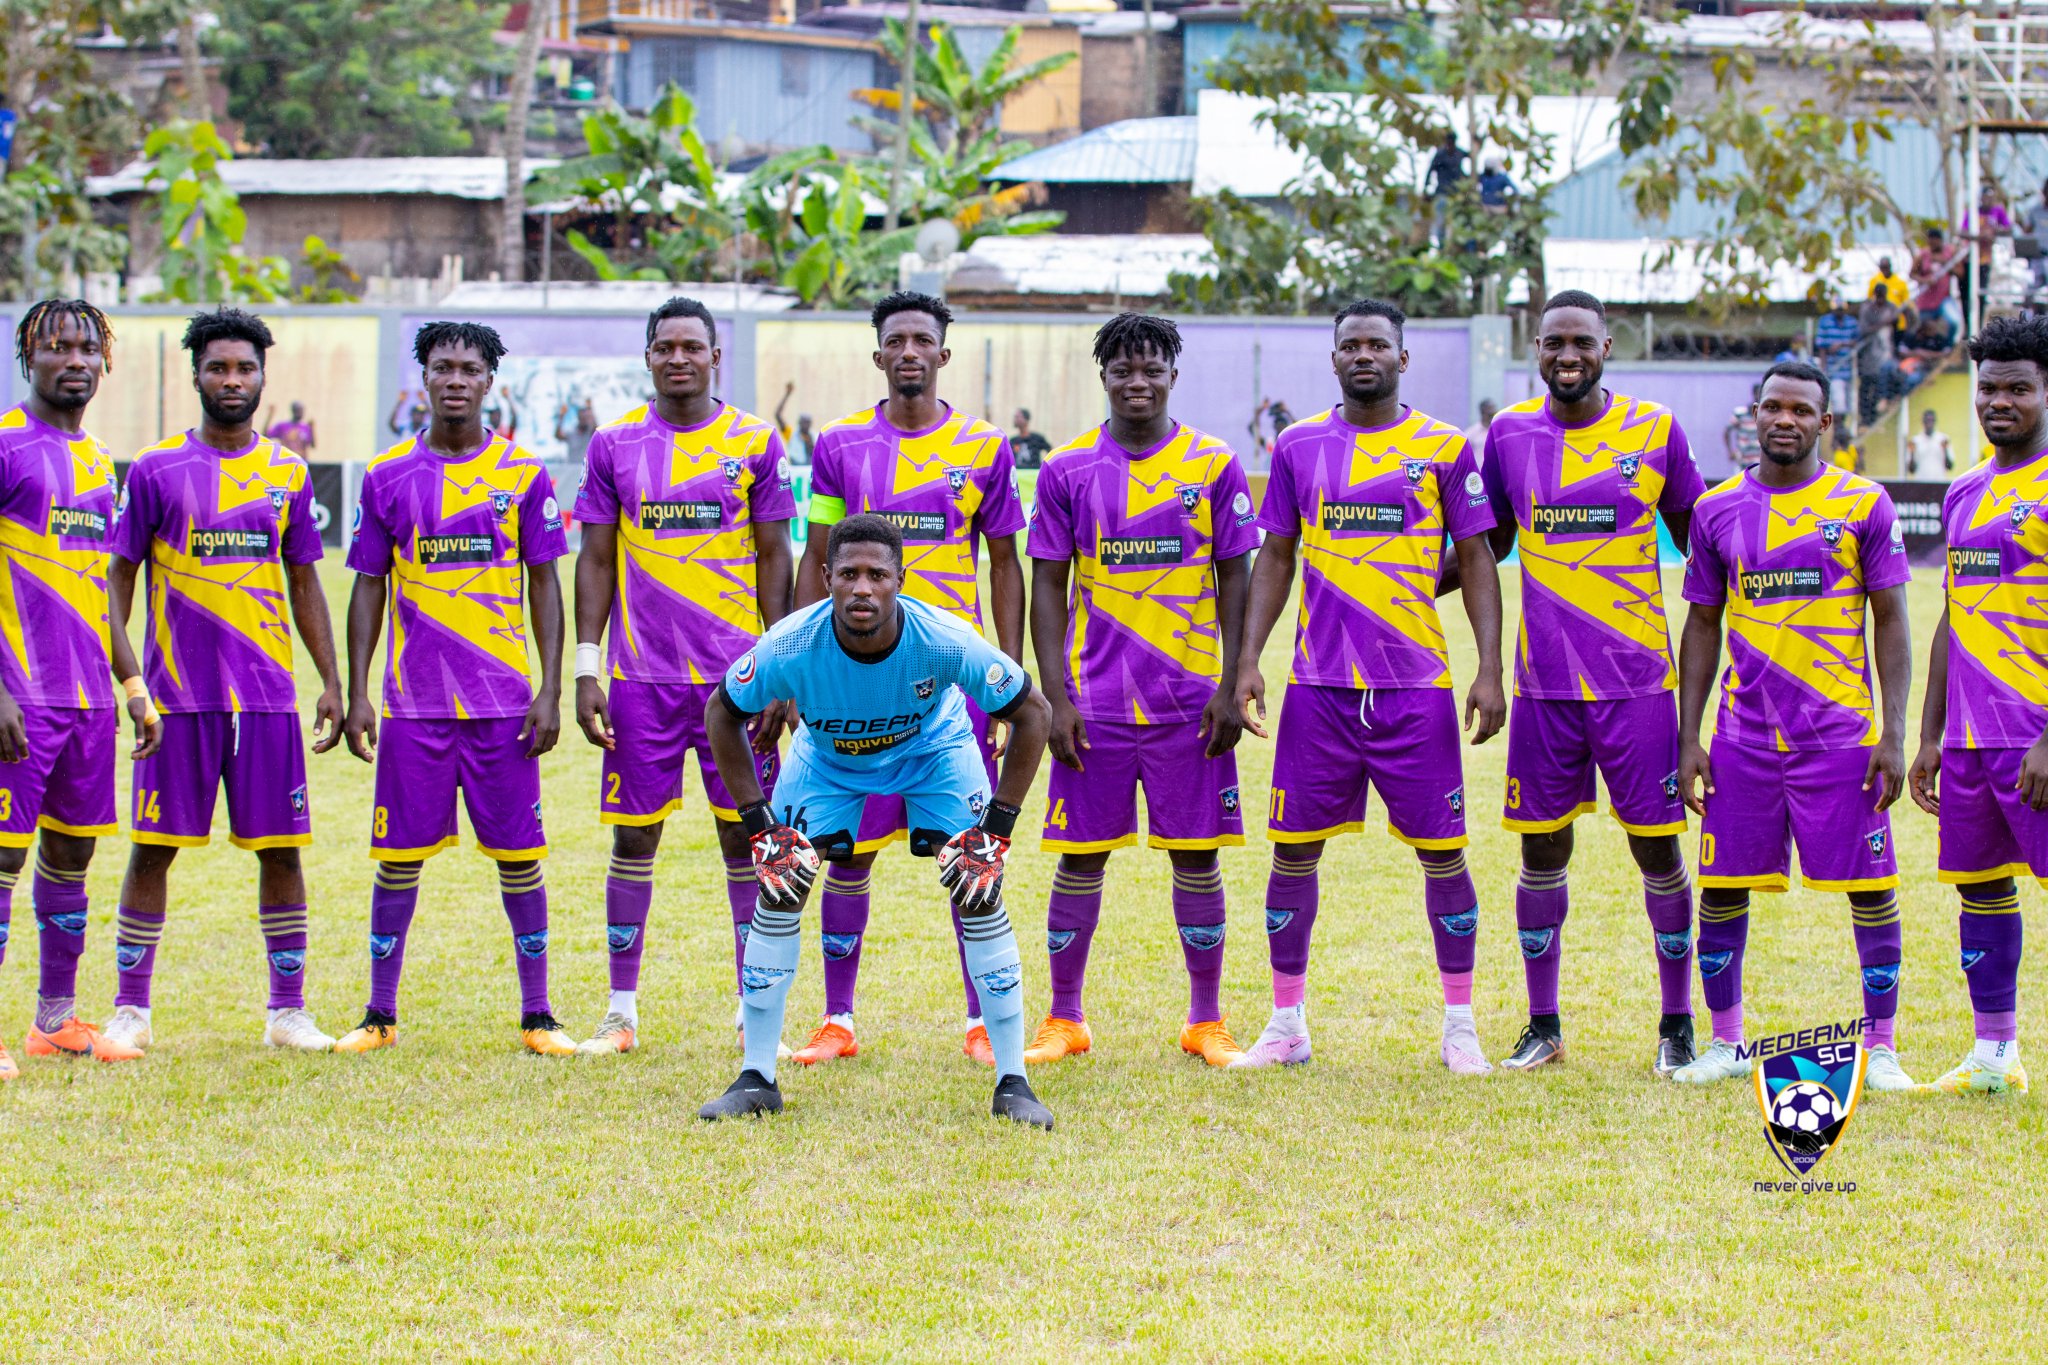 We will make sure we don't concede against Yanga - Medeama coach Evans Adotey